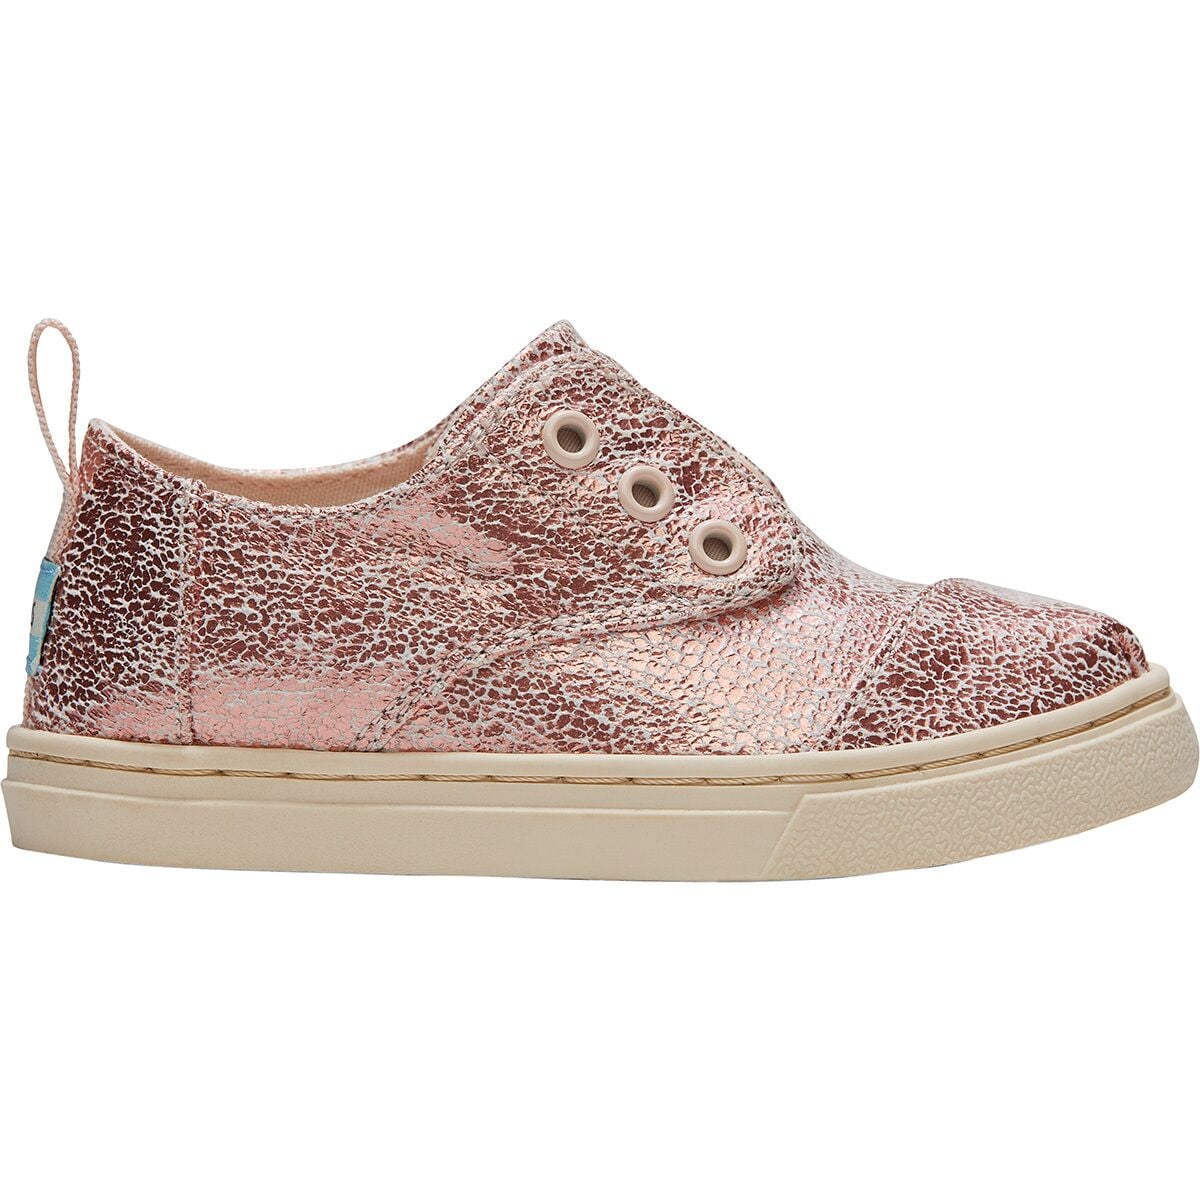 Toms Cordones Cupsole Shoe - Toddlers'